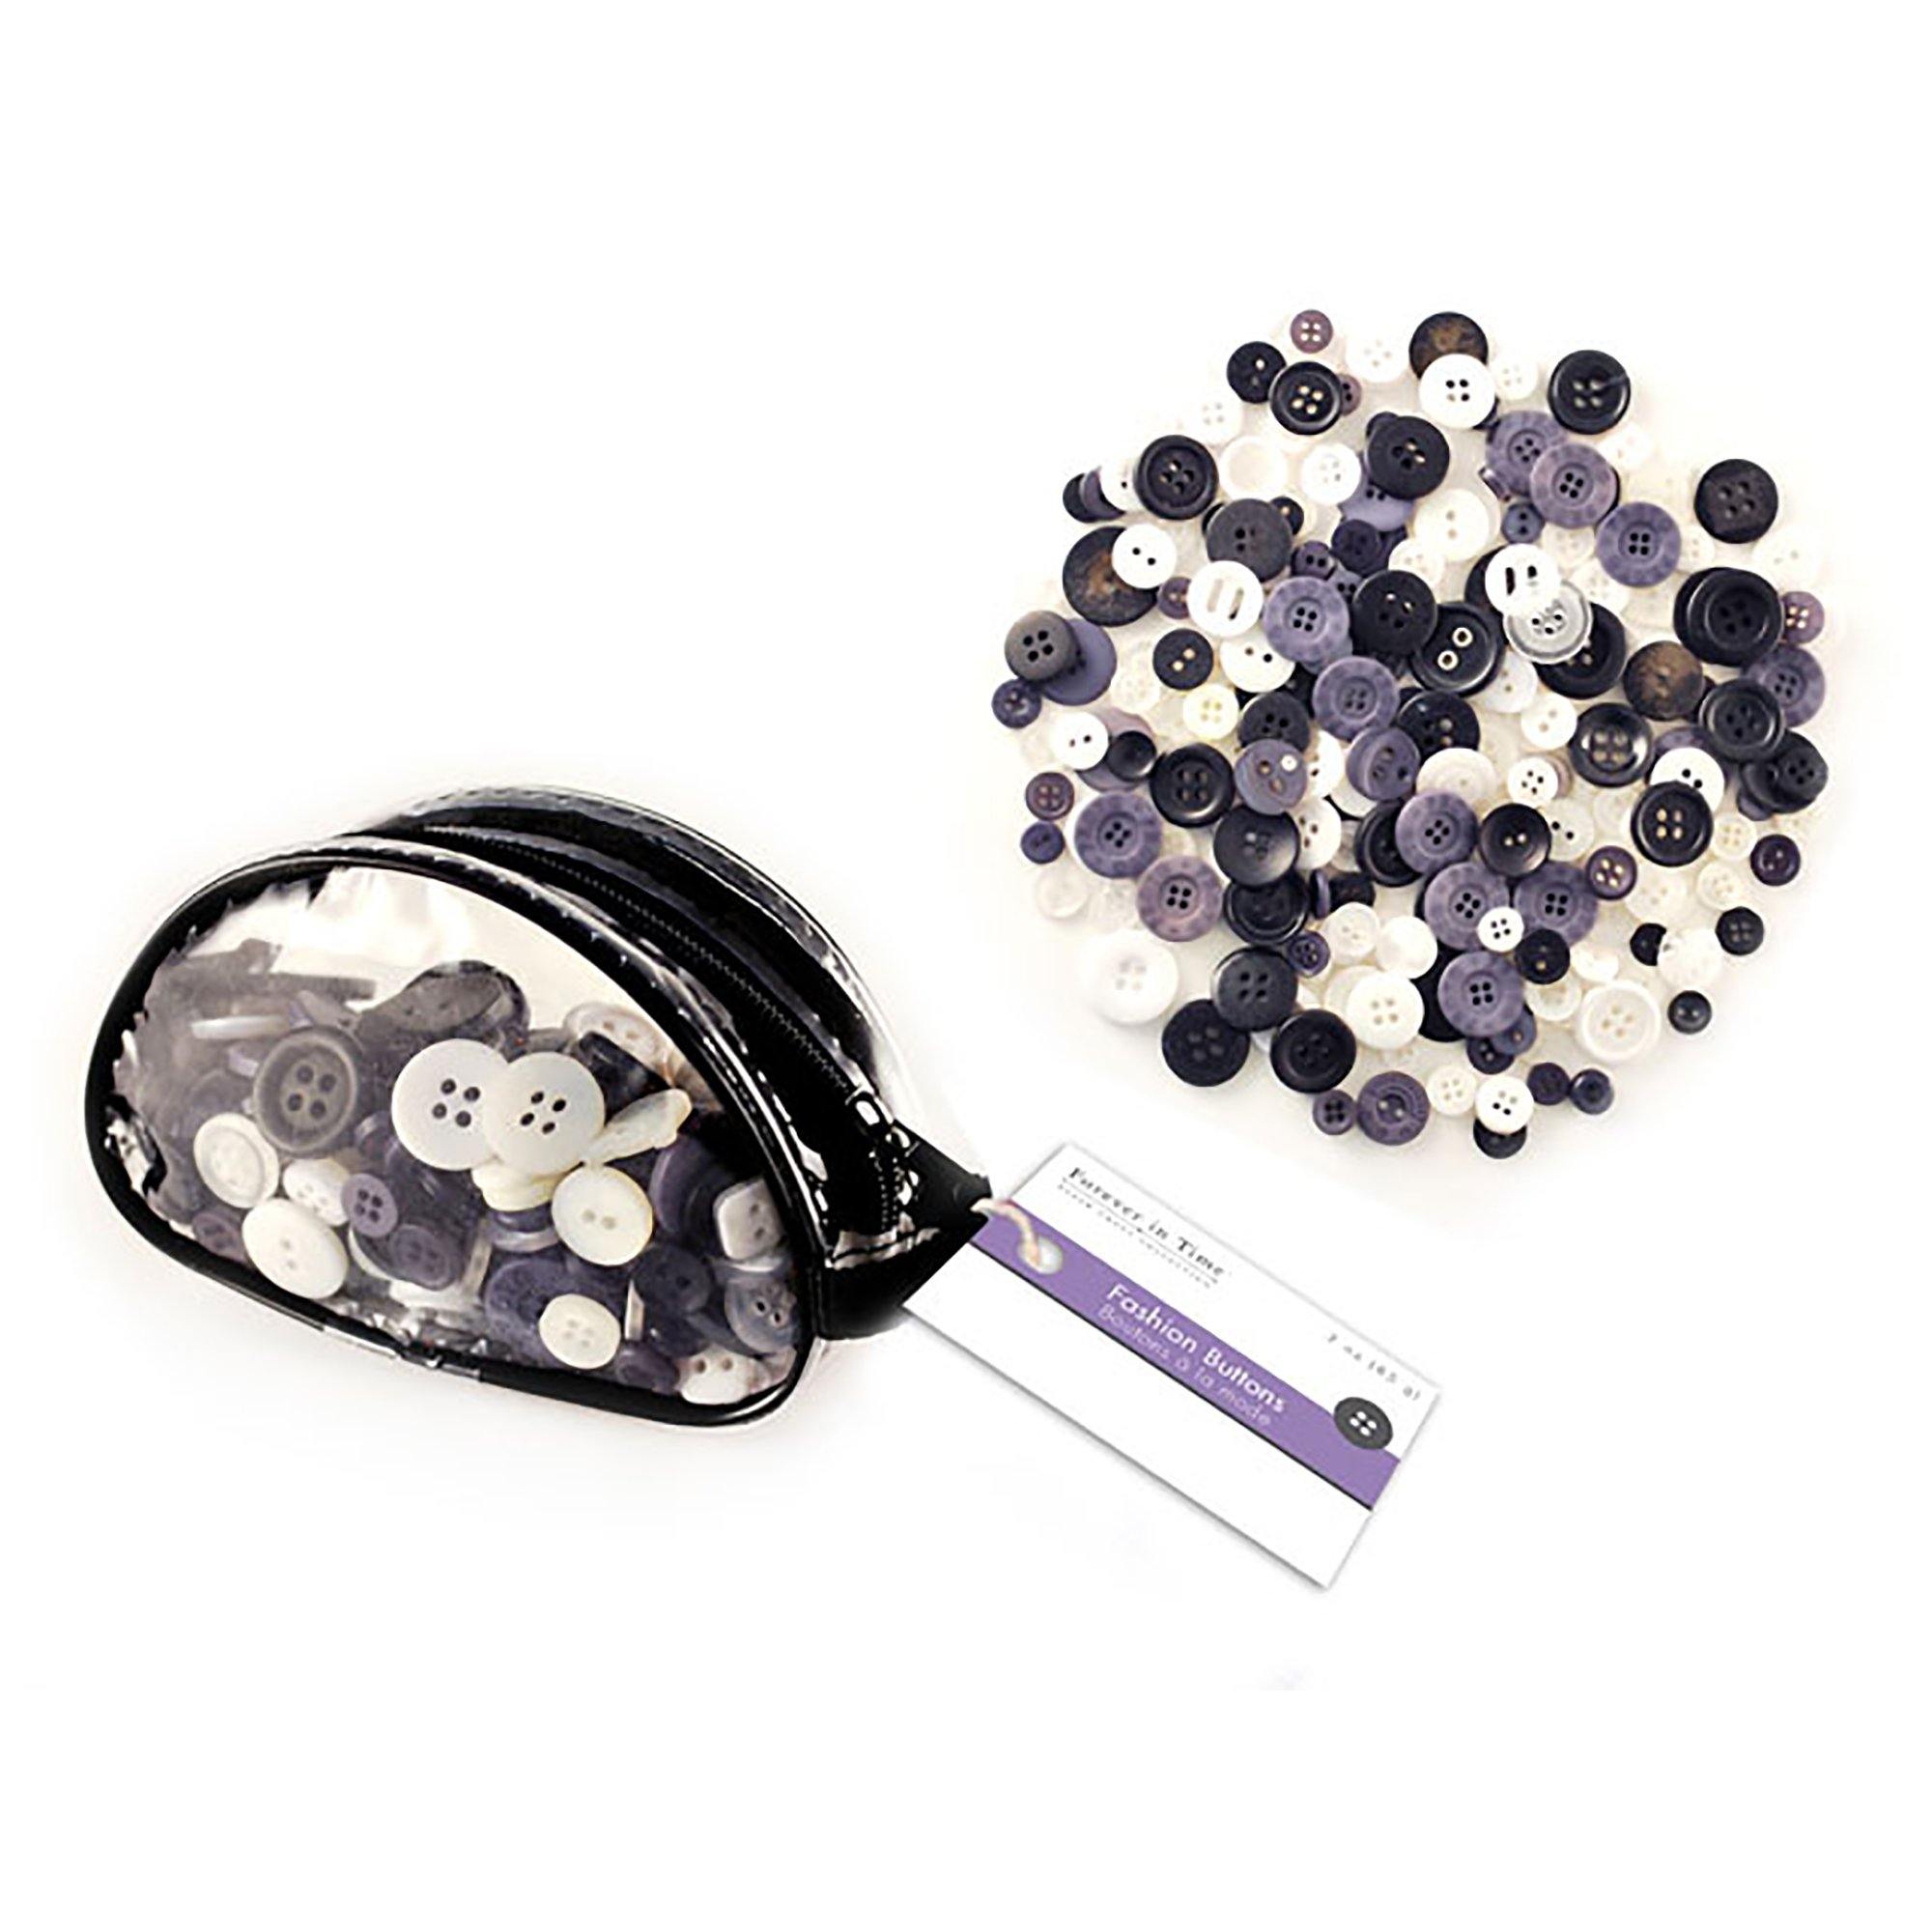 Classic Button Embellishment: 85G Fashion Dyed Buttons In Purse - Dollar Max Dépôt